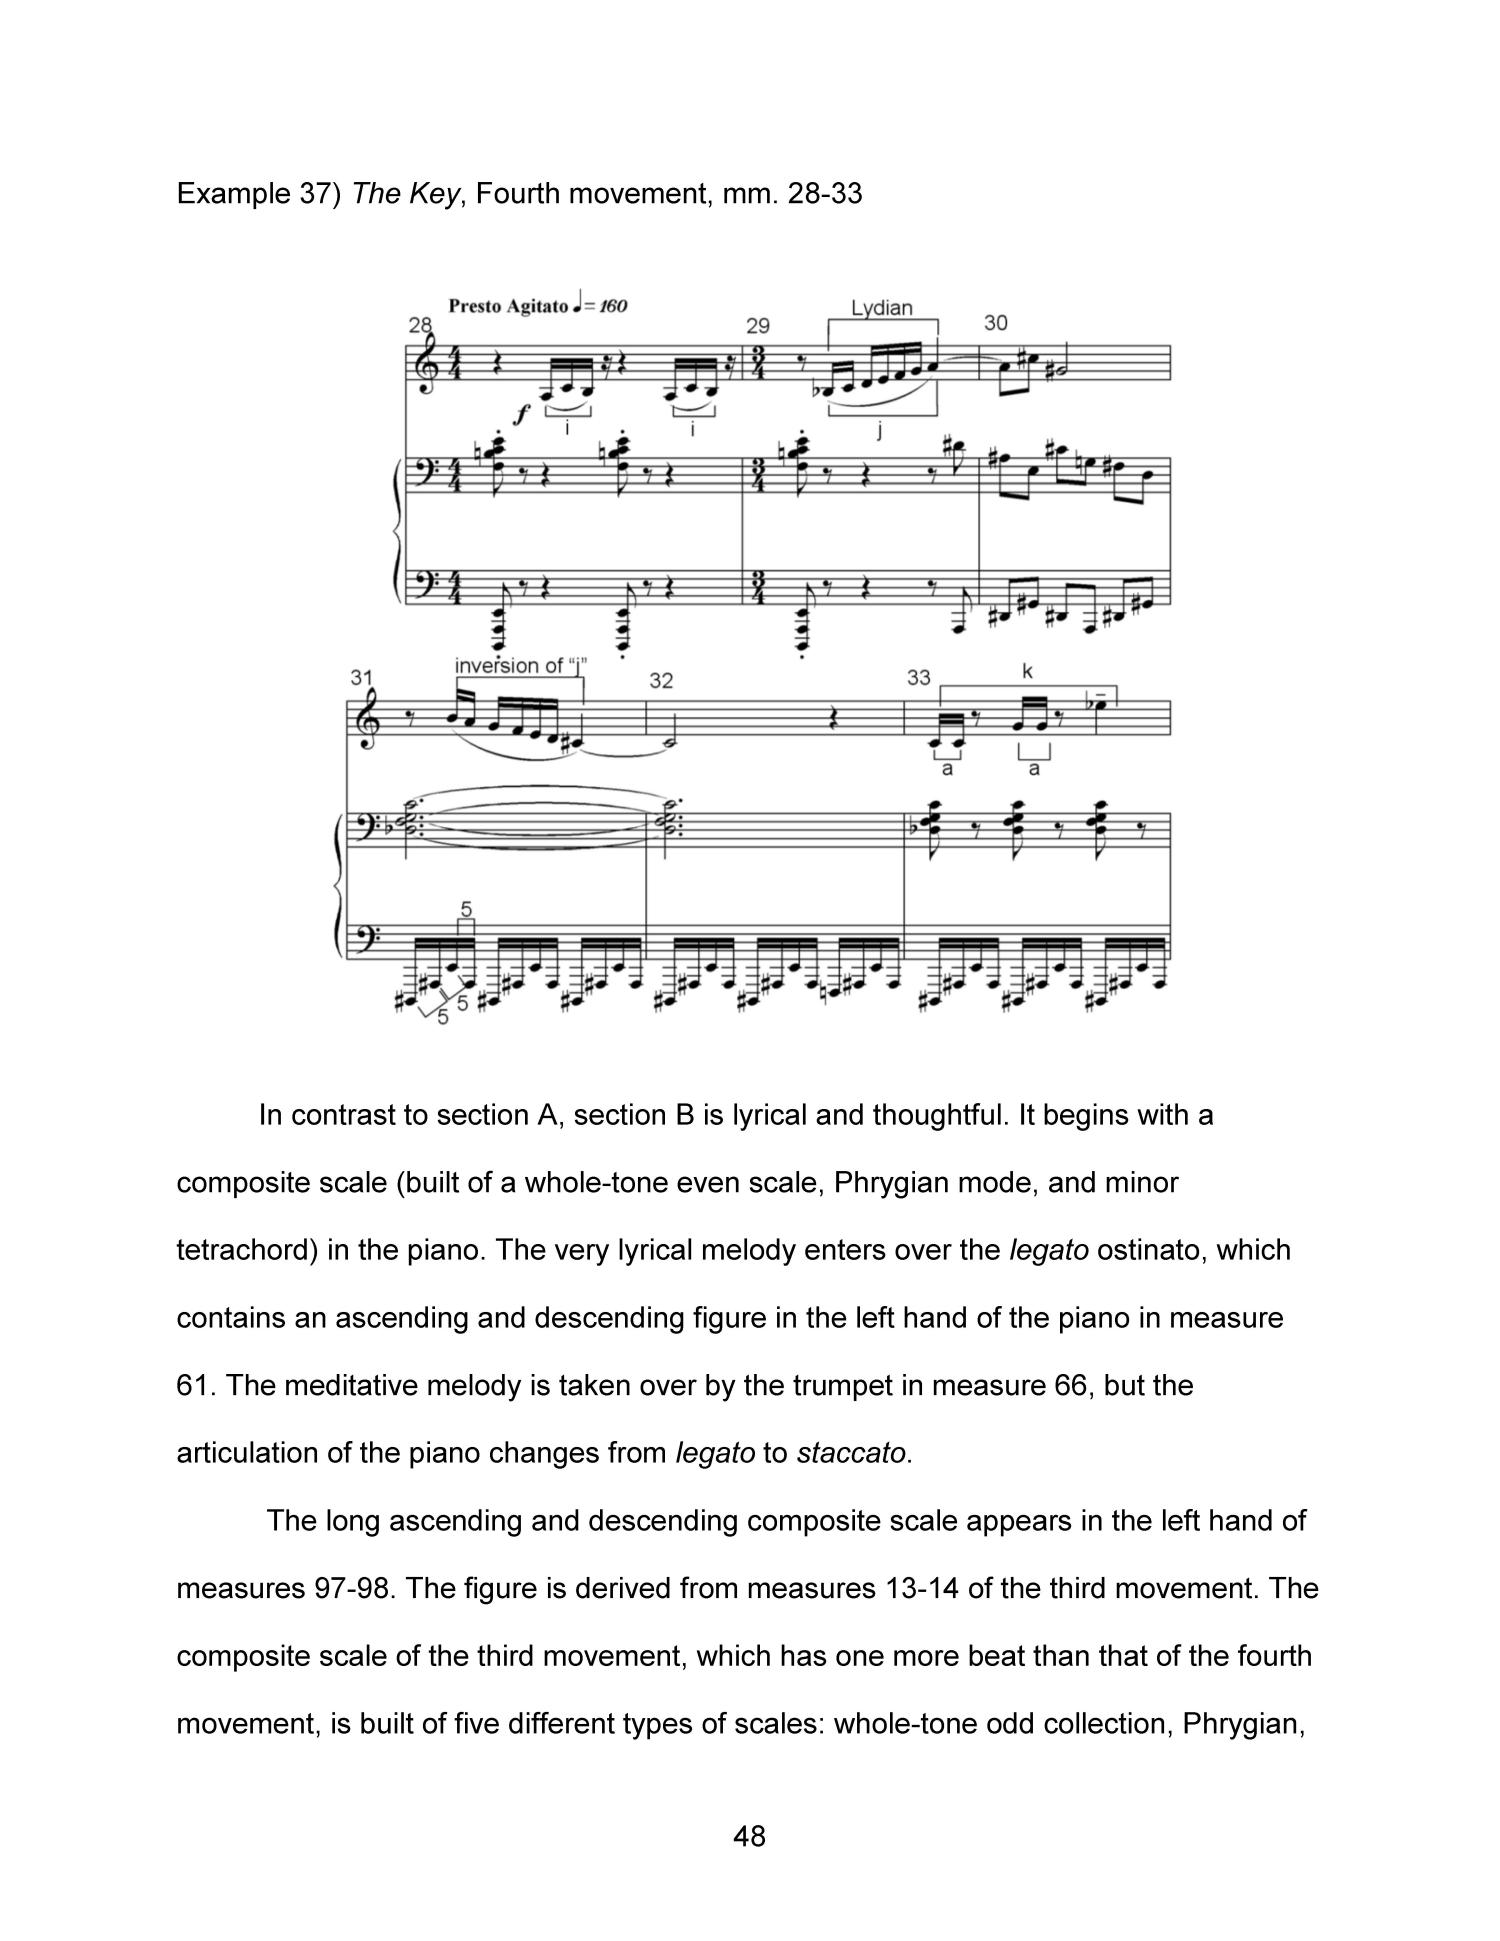 A Stylistic and Analytical Study of The Key for Trumpet and Piano by James Wintle
                                                
                                                    48
                                                